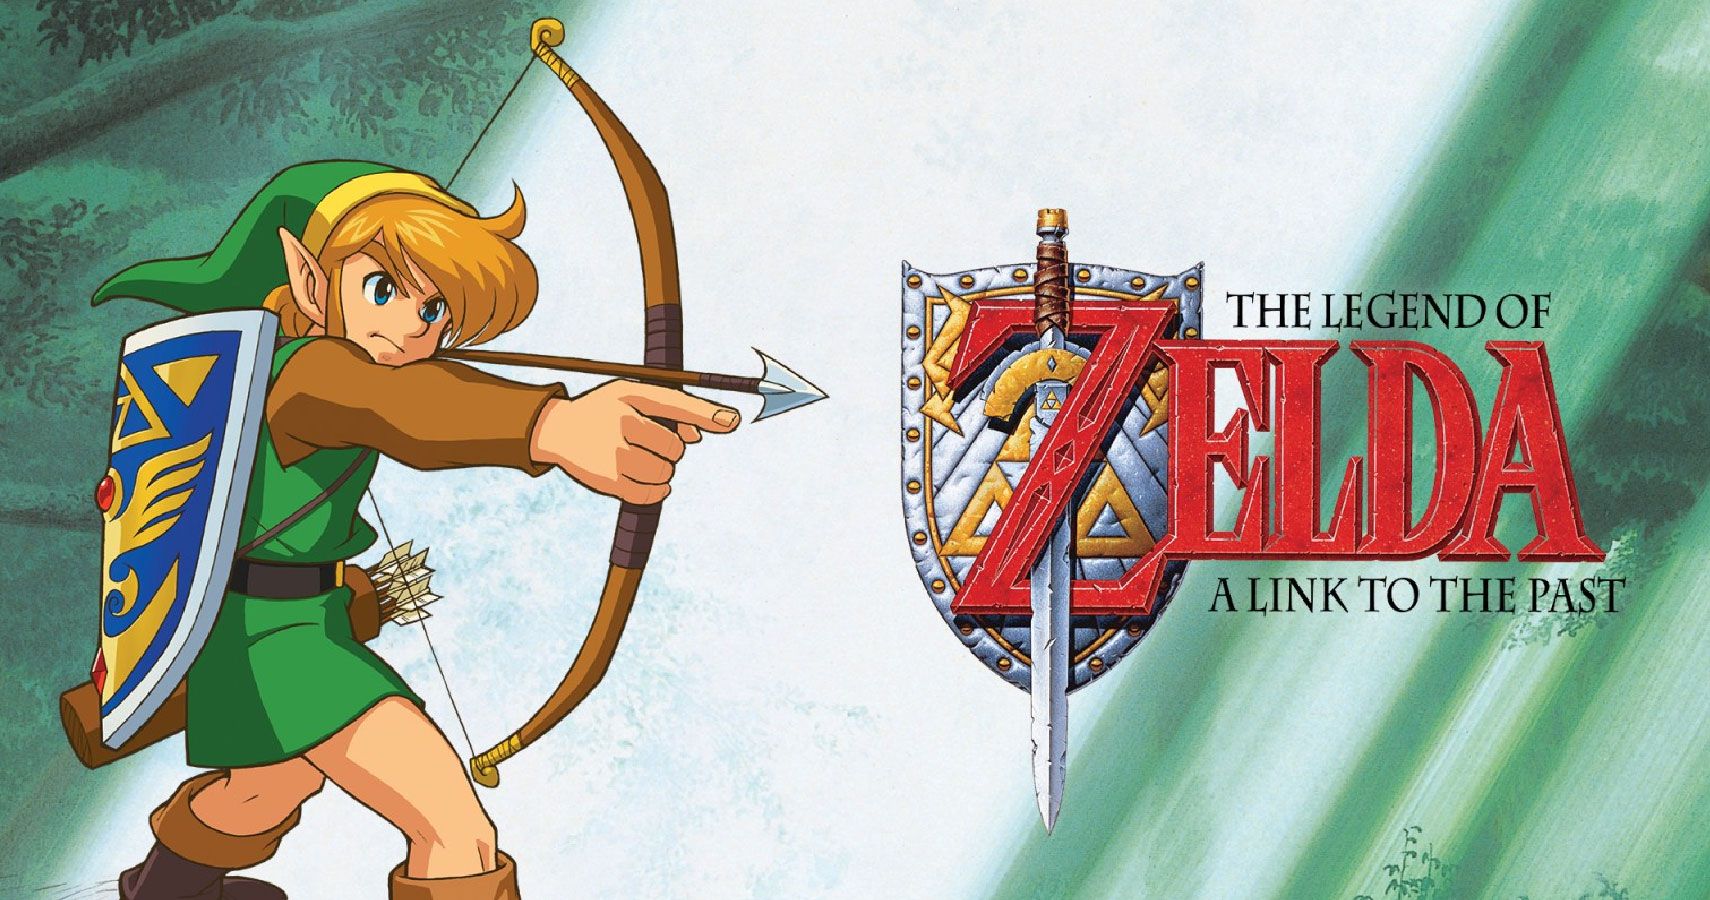 The Legend of Zelda: A Link to the Past (Video Game) - TV Tropes